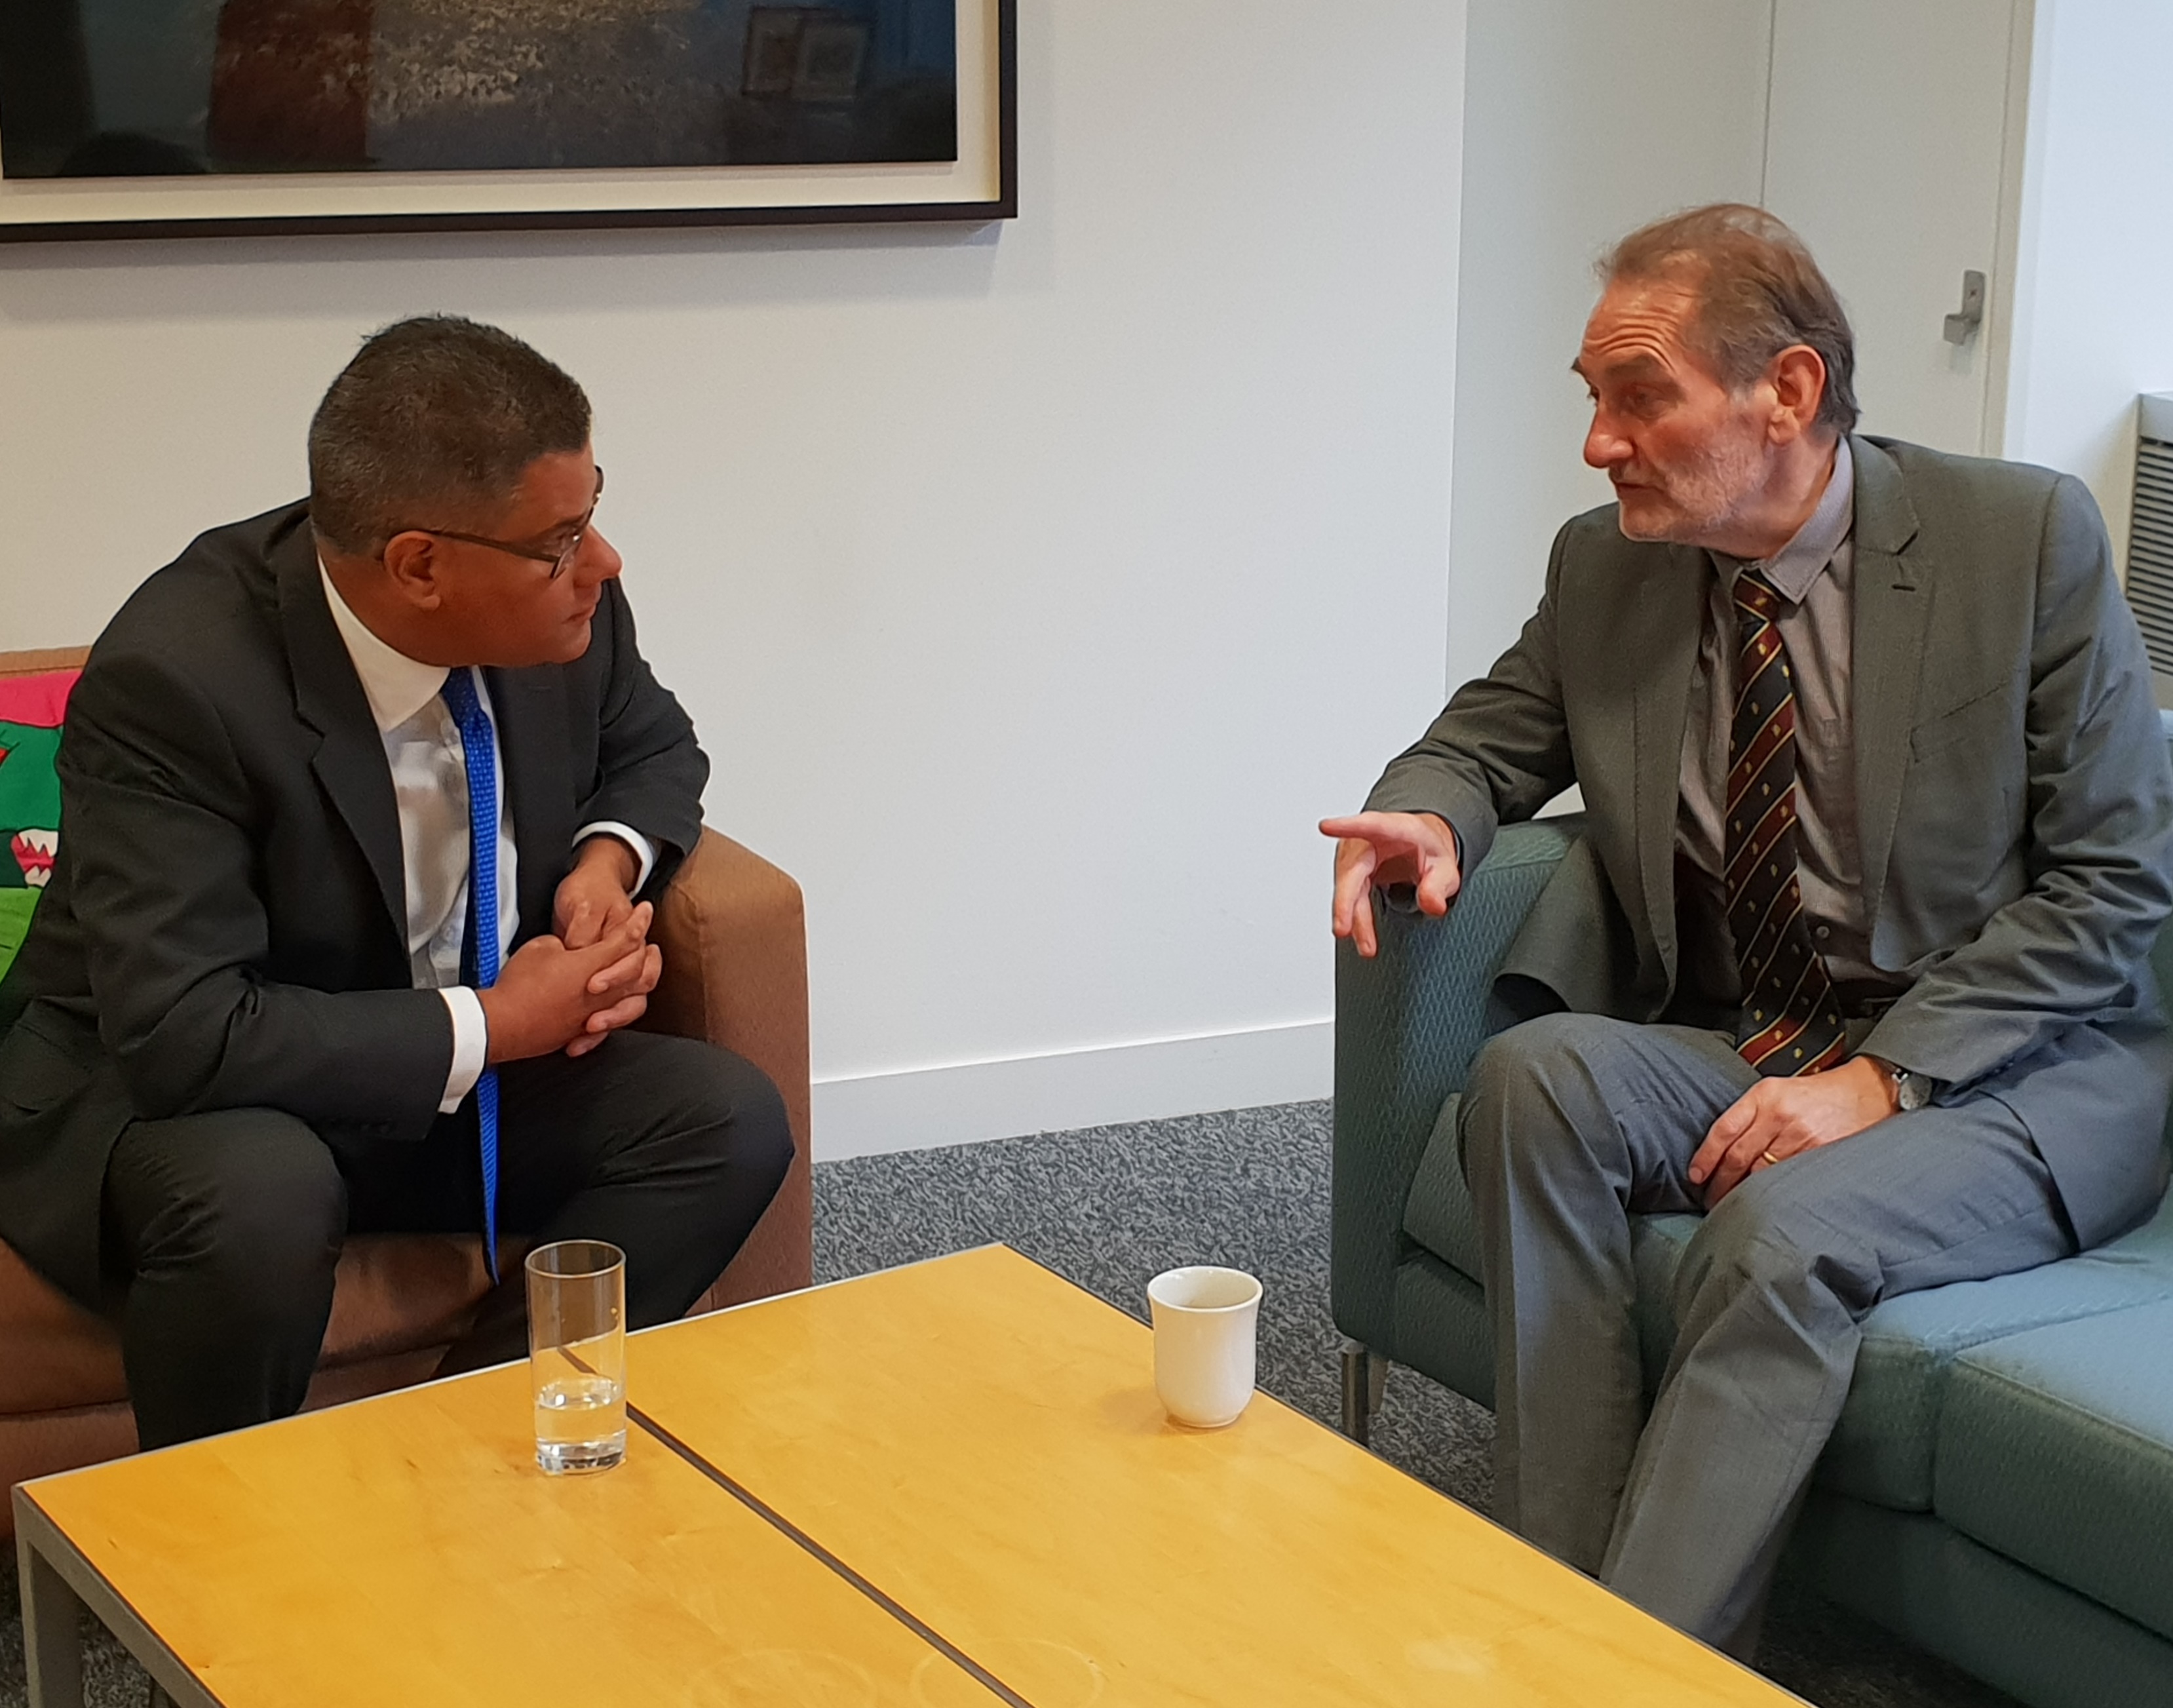 Photograph of Alok Sharma (Minister of State for Employment) meeting Sir Ian Diamond (Chair of the Social Security Advisory Committee)